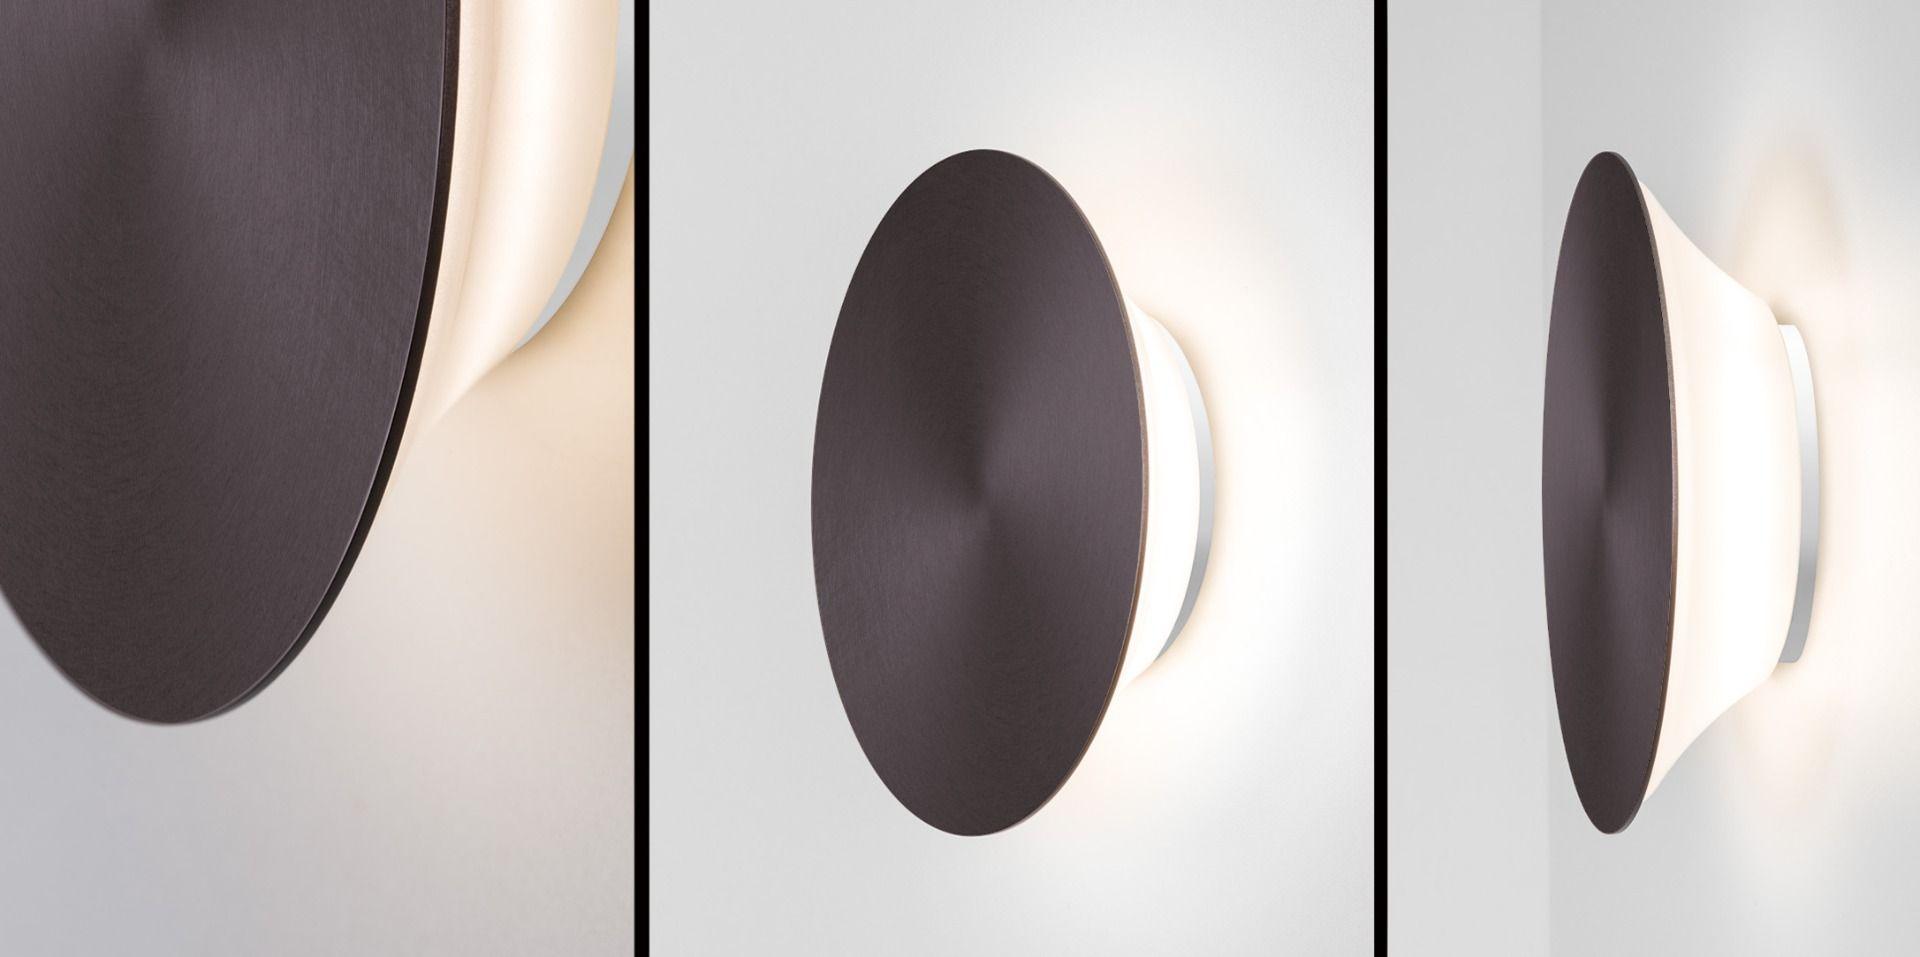 Pageone - Eclipse (S) 7.1". Wall Sconce - Hbdepot